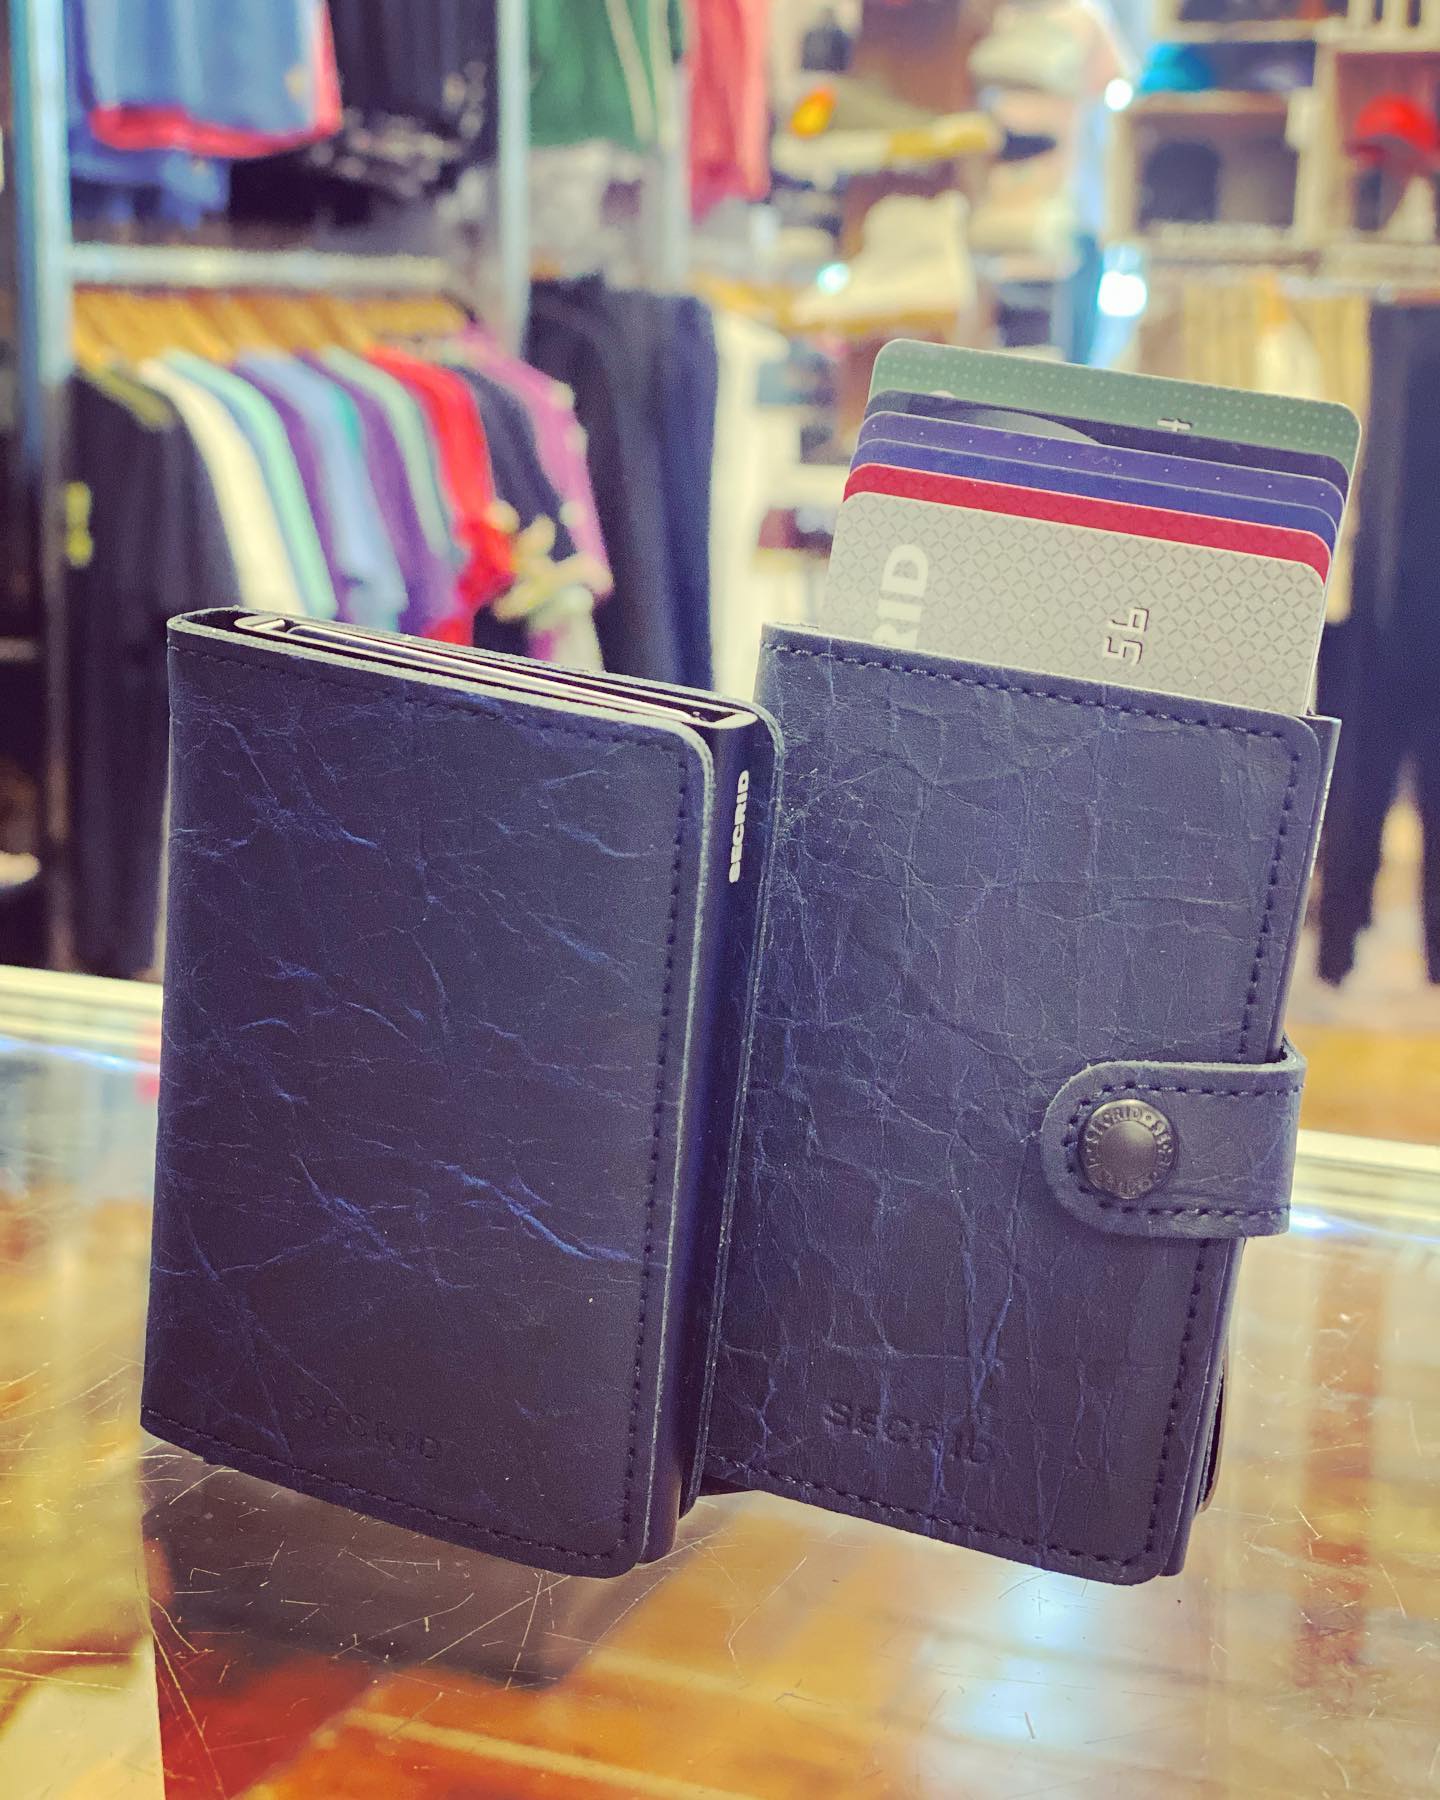 The new Secrid wallets are...